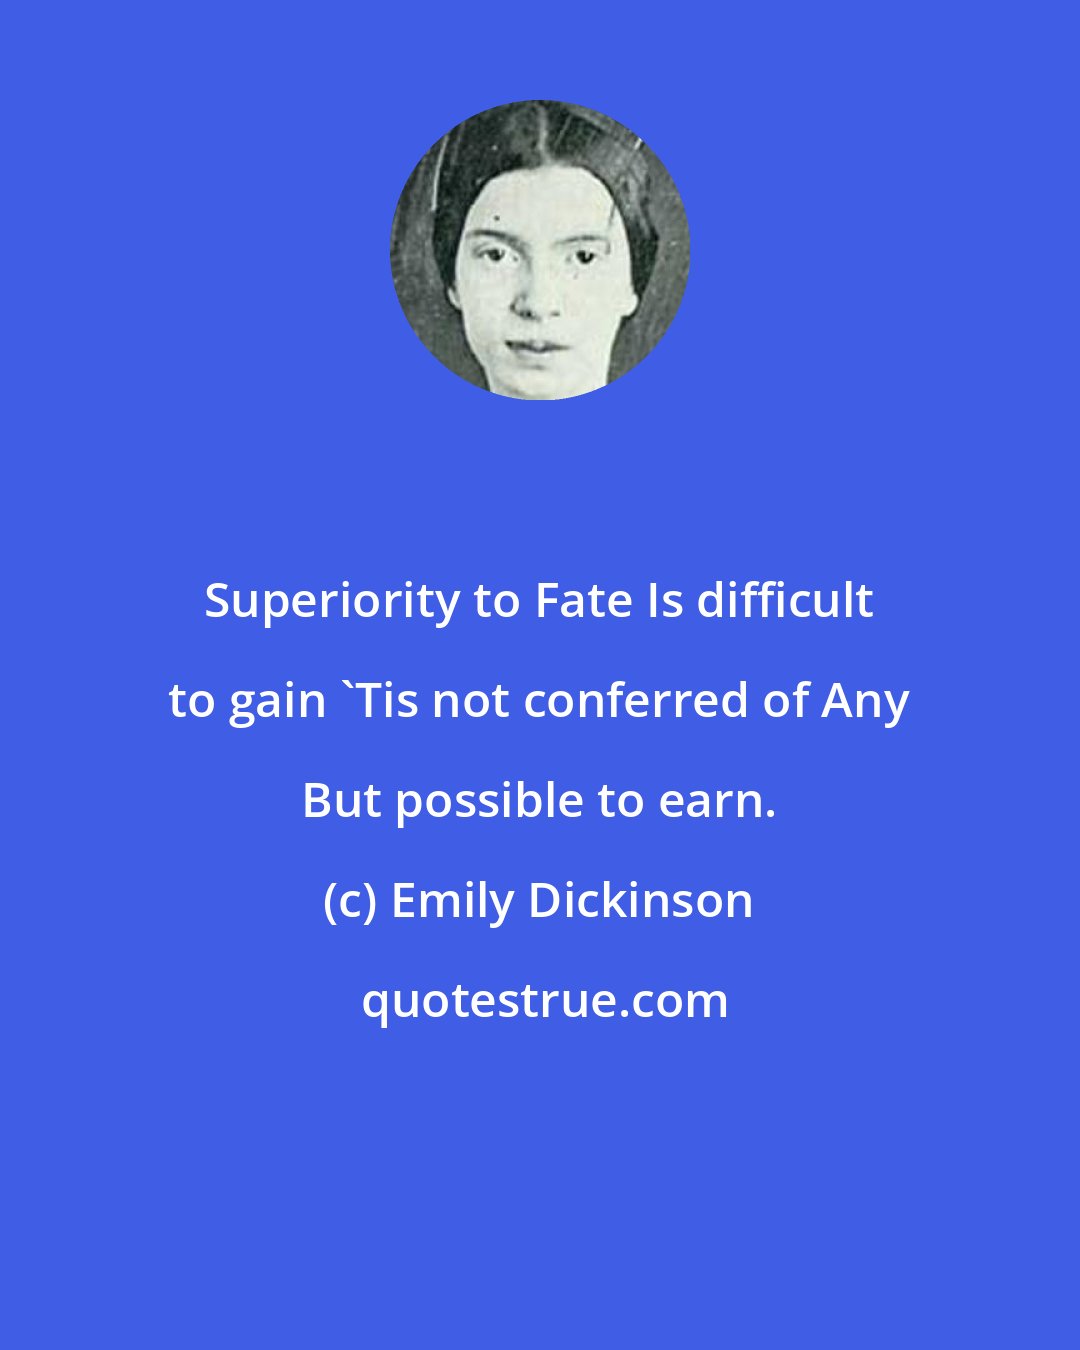 Emily Dickinson: Superiority to Fate Is difficult to gain 'Tis not conferred of Any But possible to earn.